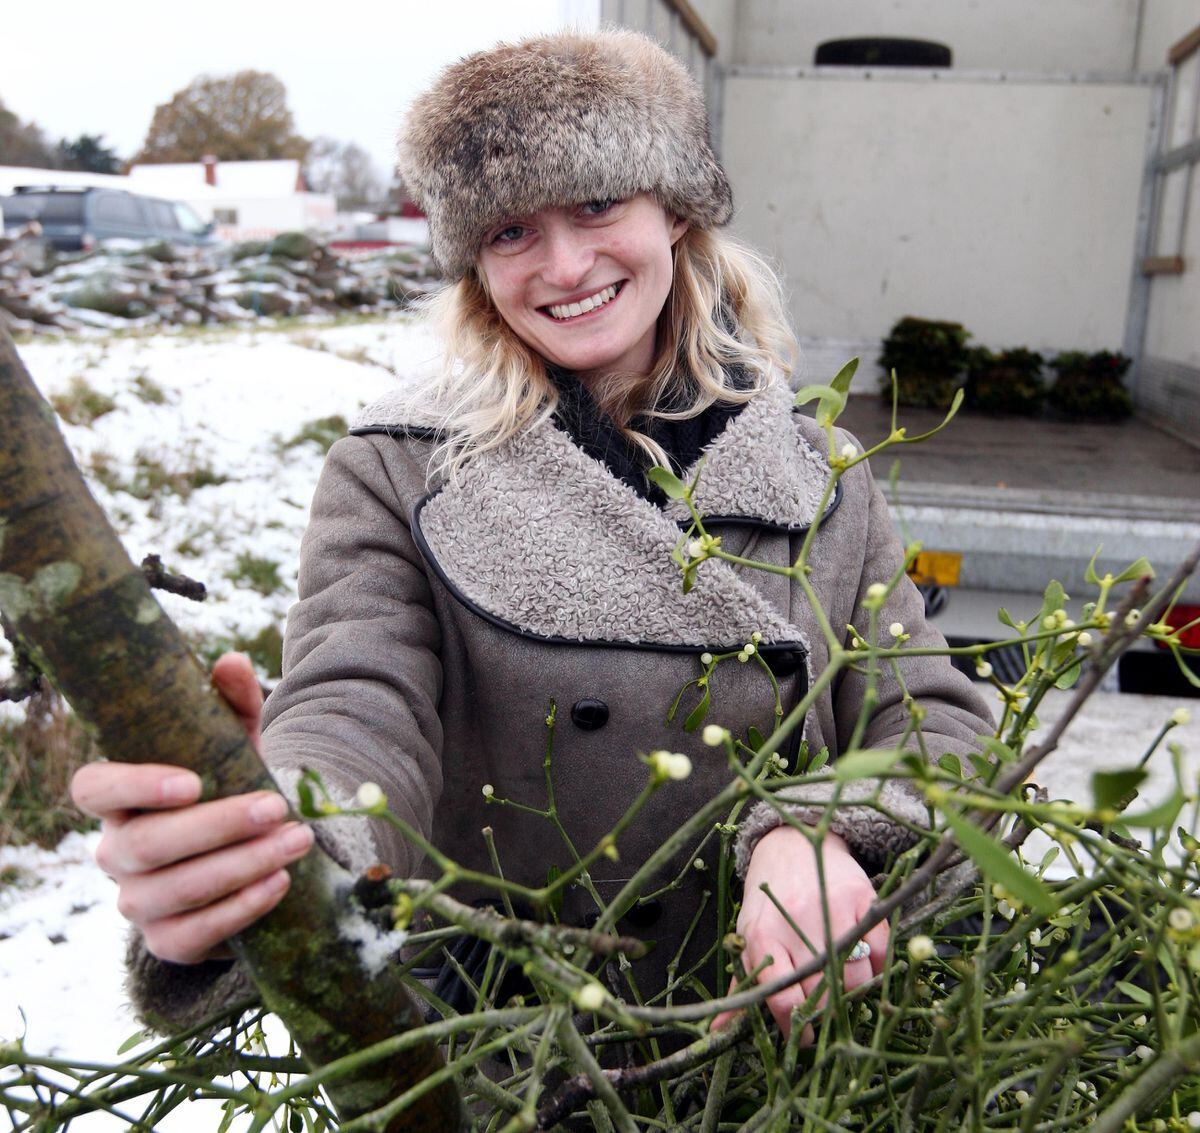 November 2010: Kate Vogel, from Oswestry, gathers mistletoe after travelling to the Tenbury Mistletoe and Holly auction for her forthcoming wedding